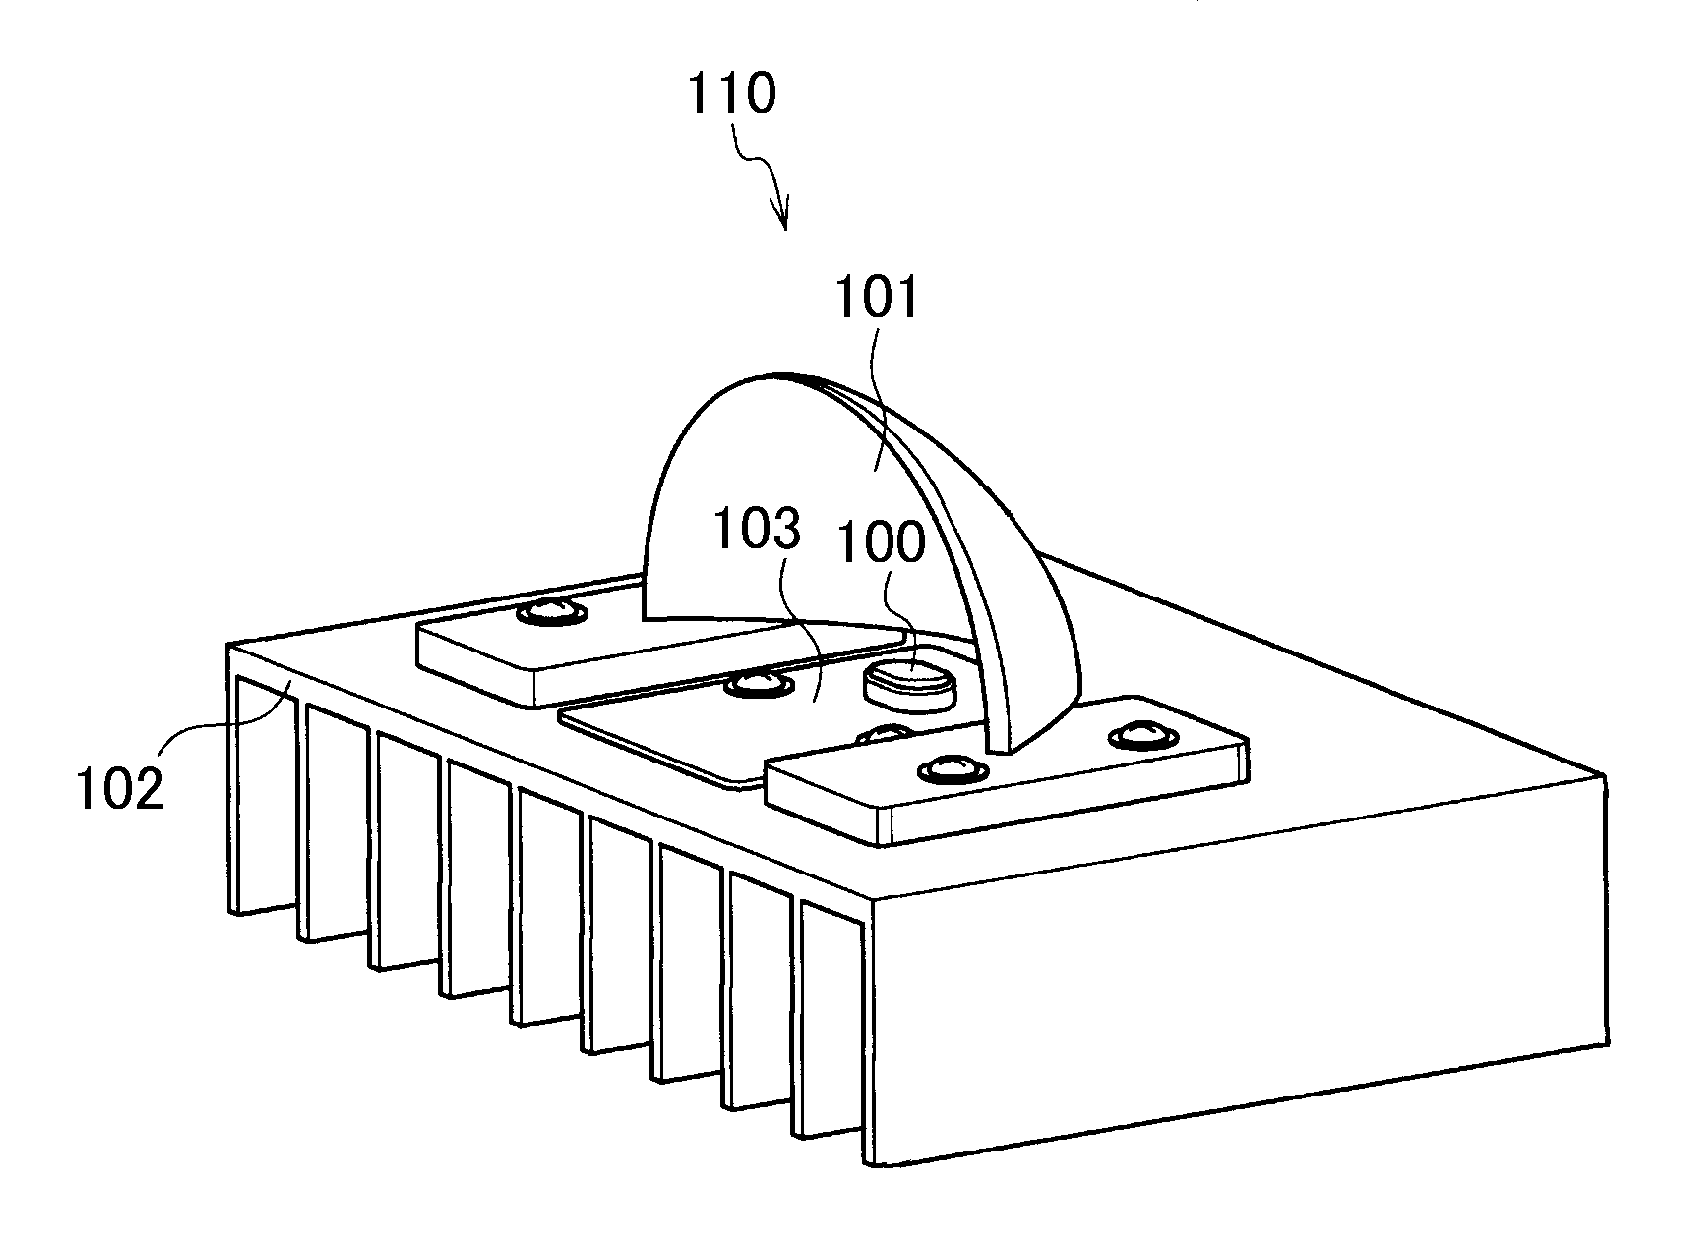 Semiconductor light emitting device and manufacturing method